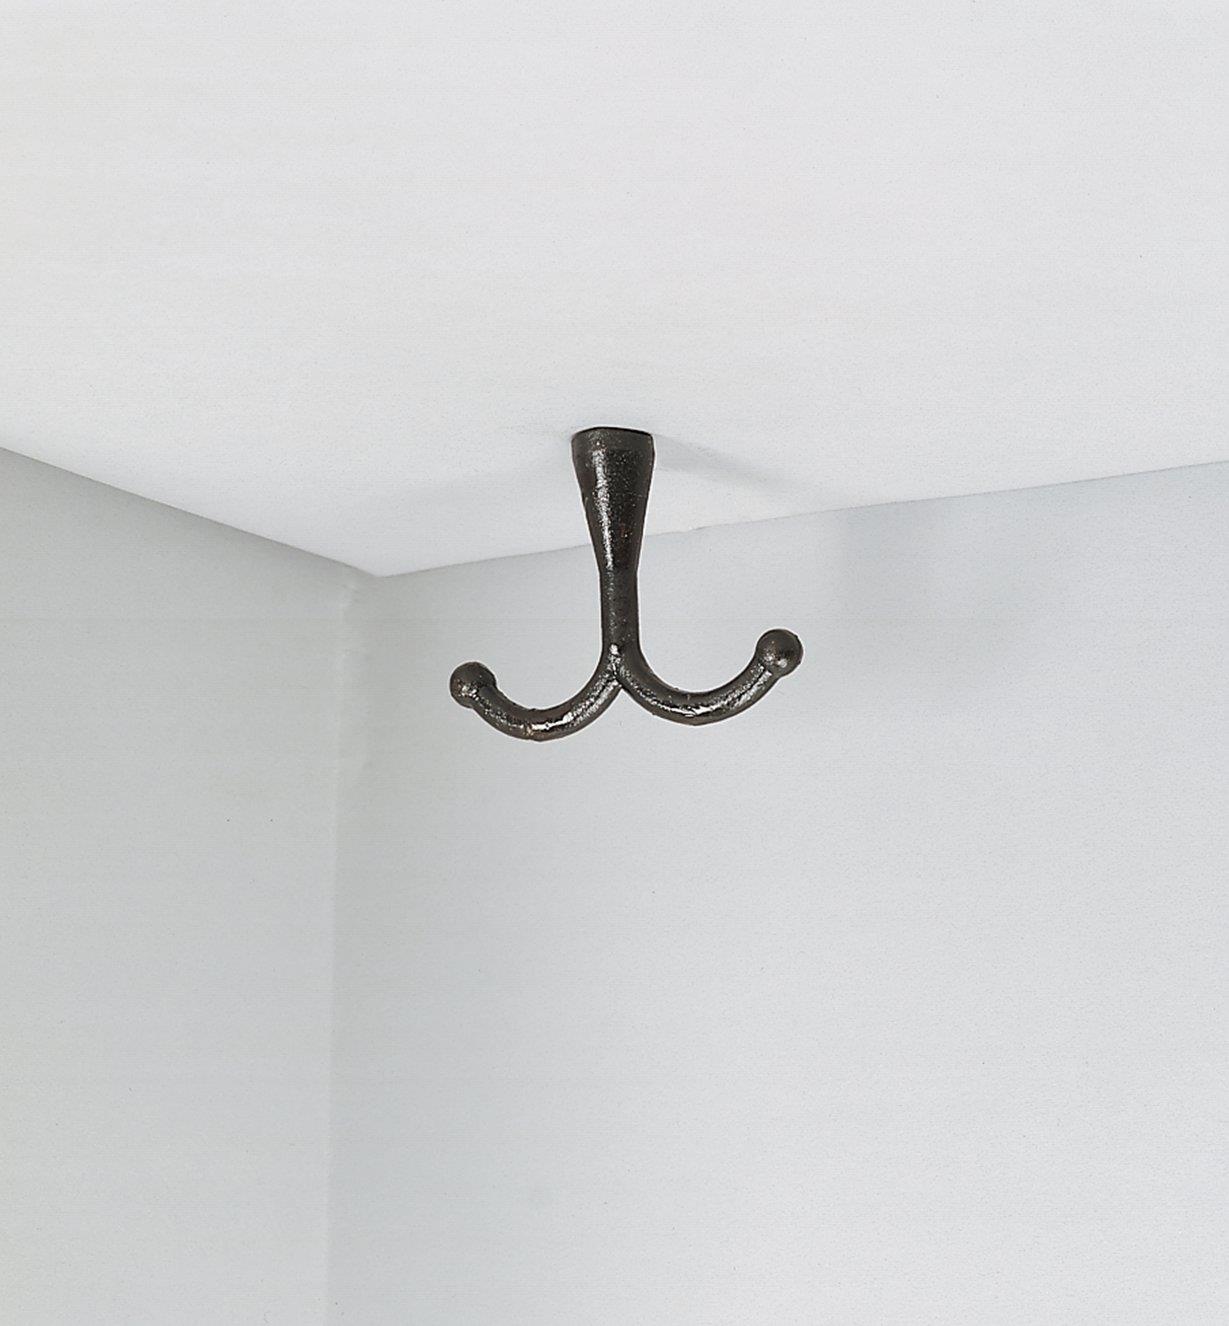 Hanging Double Hook mounted to a ceiling